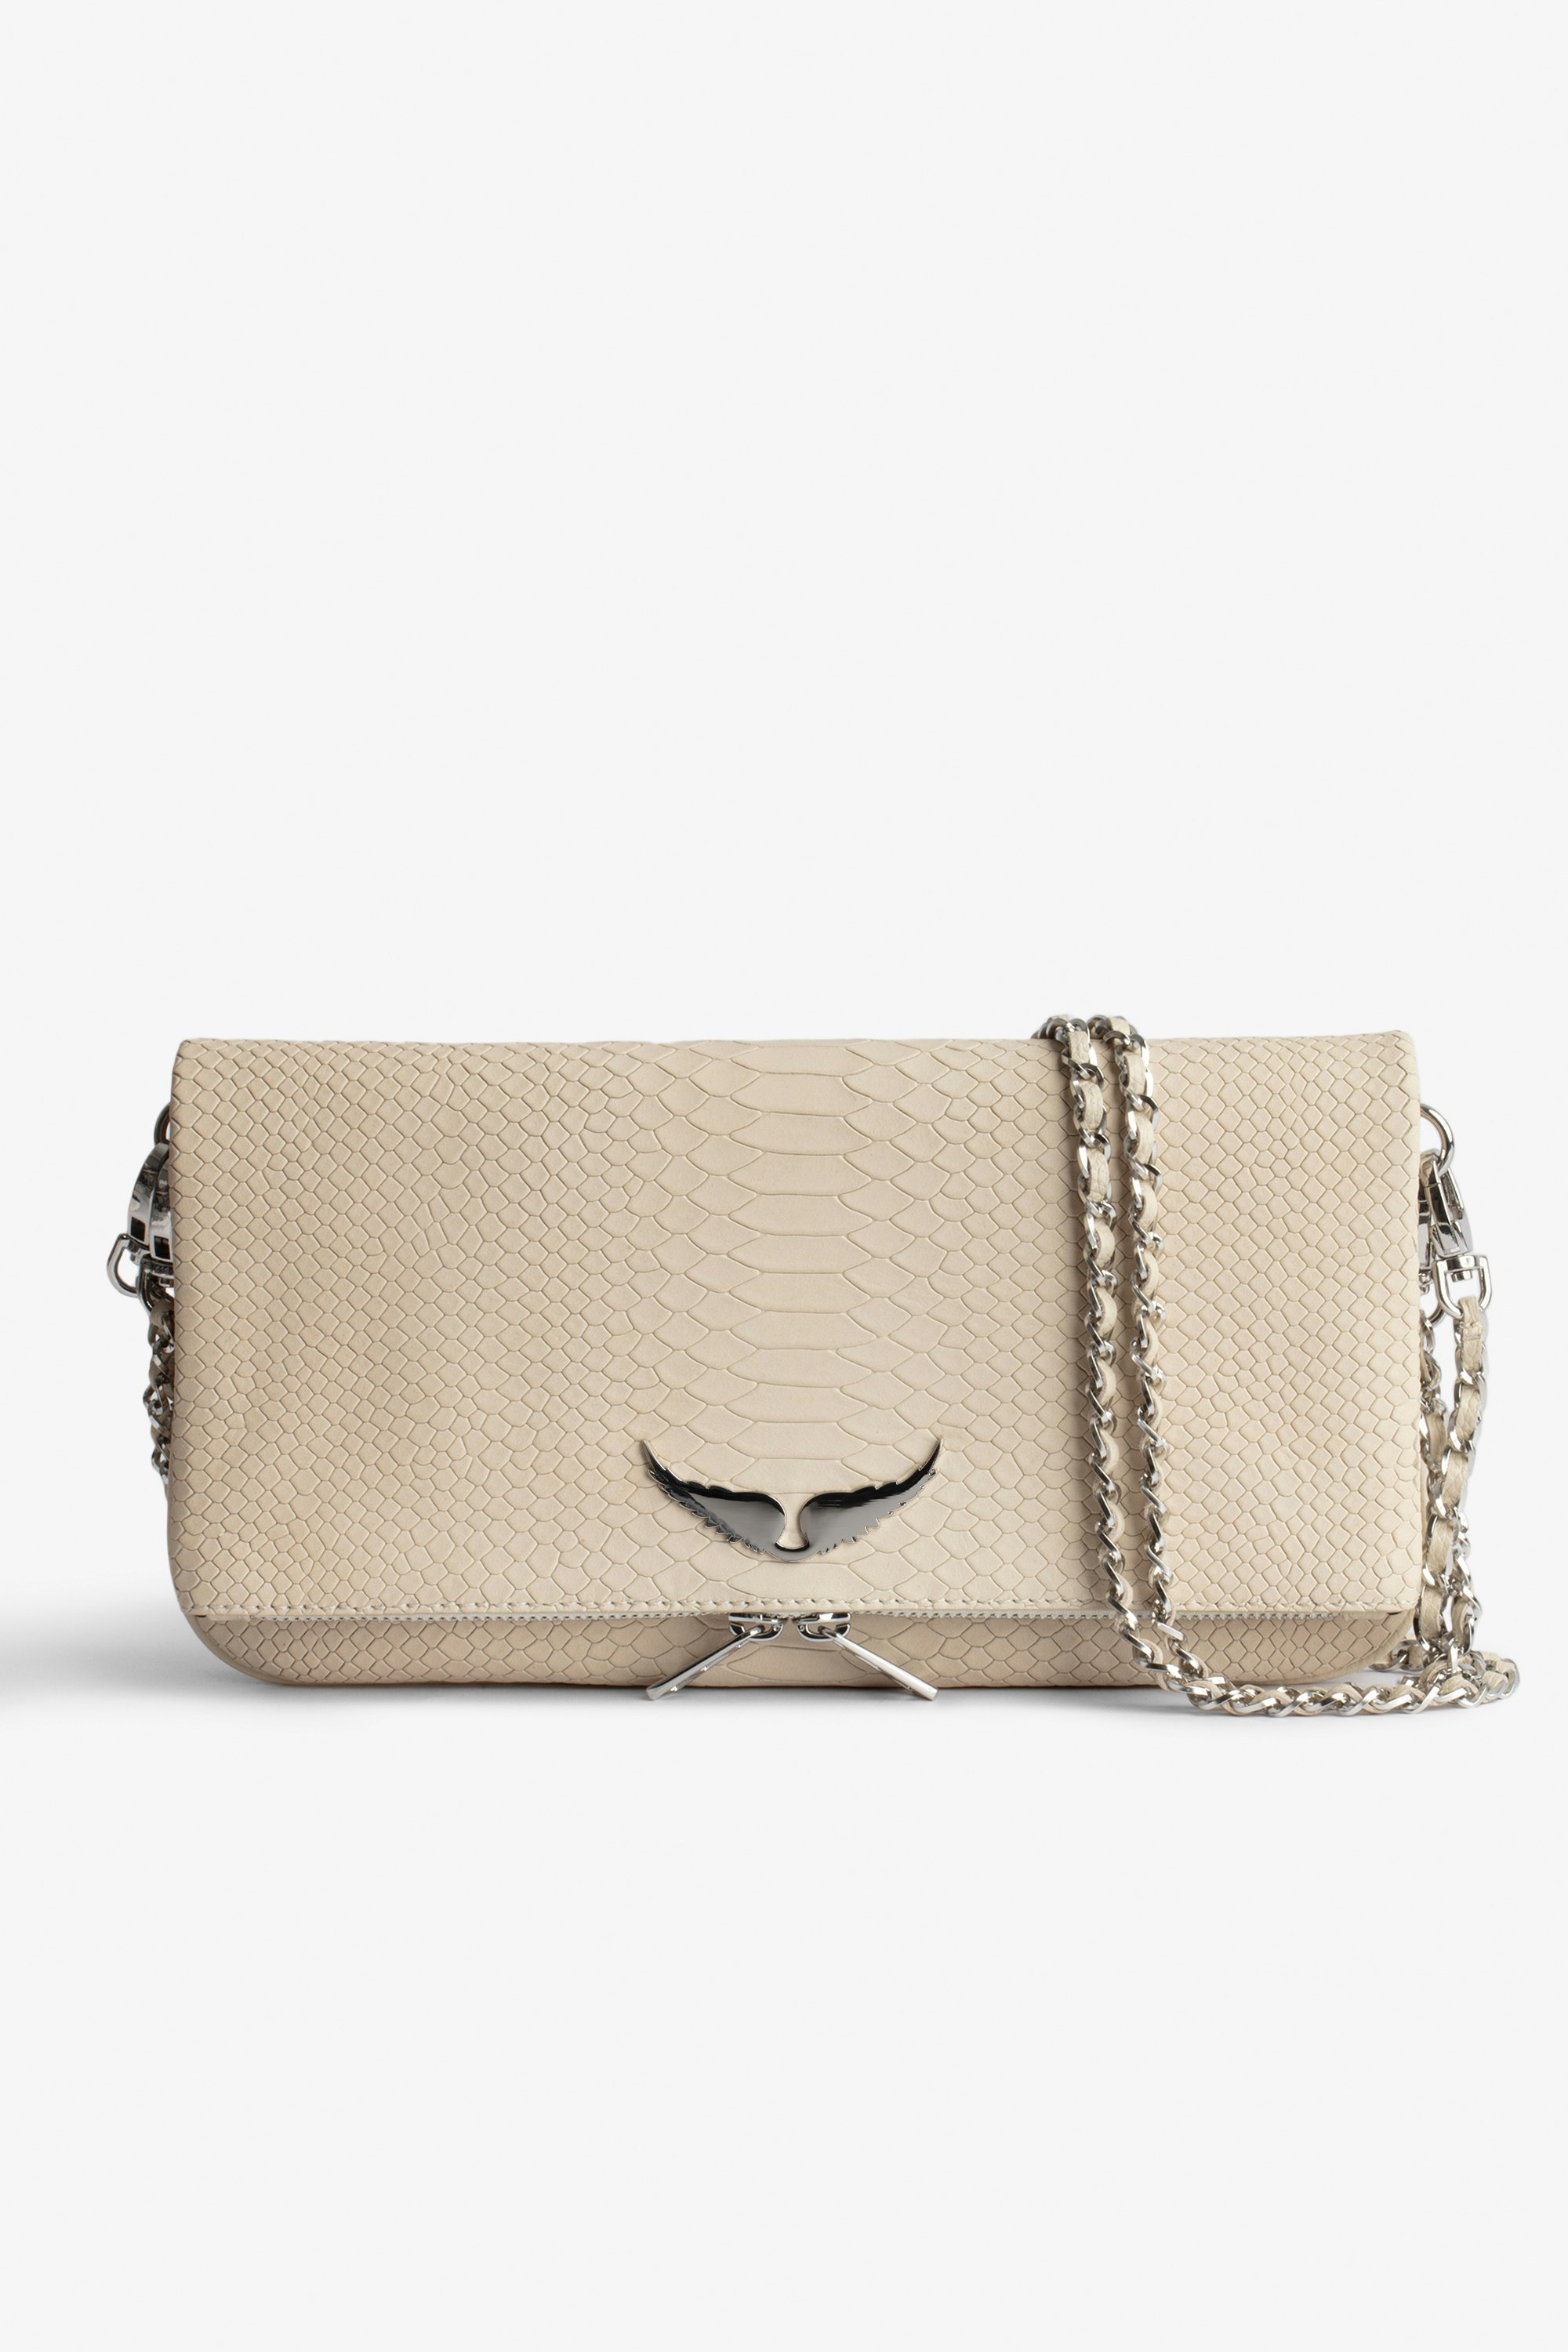 Soft Savage Rock Clutch Women’s clutch in ecru python-effect leather with double leather-and-metal chain